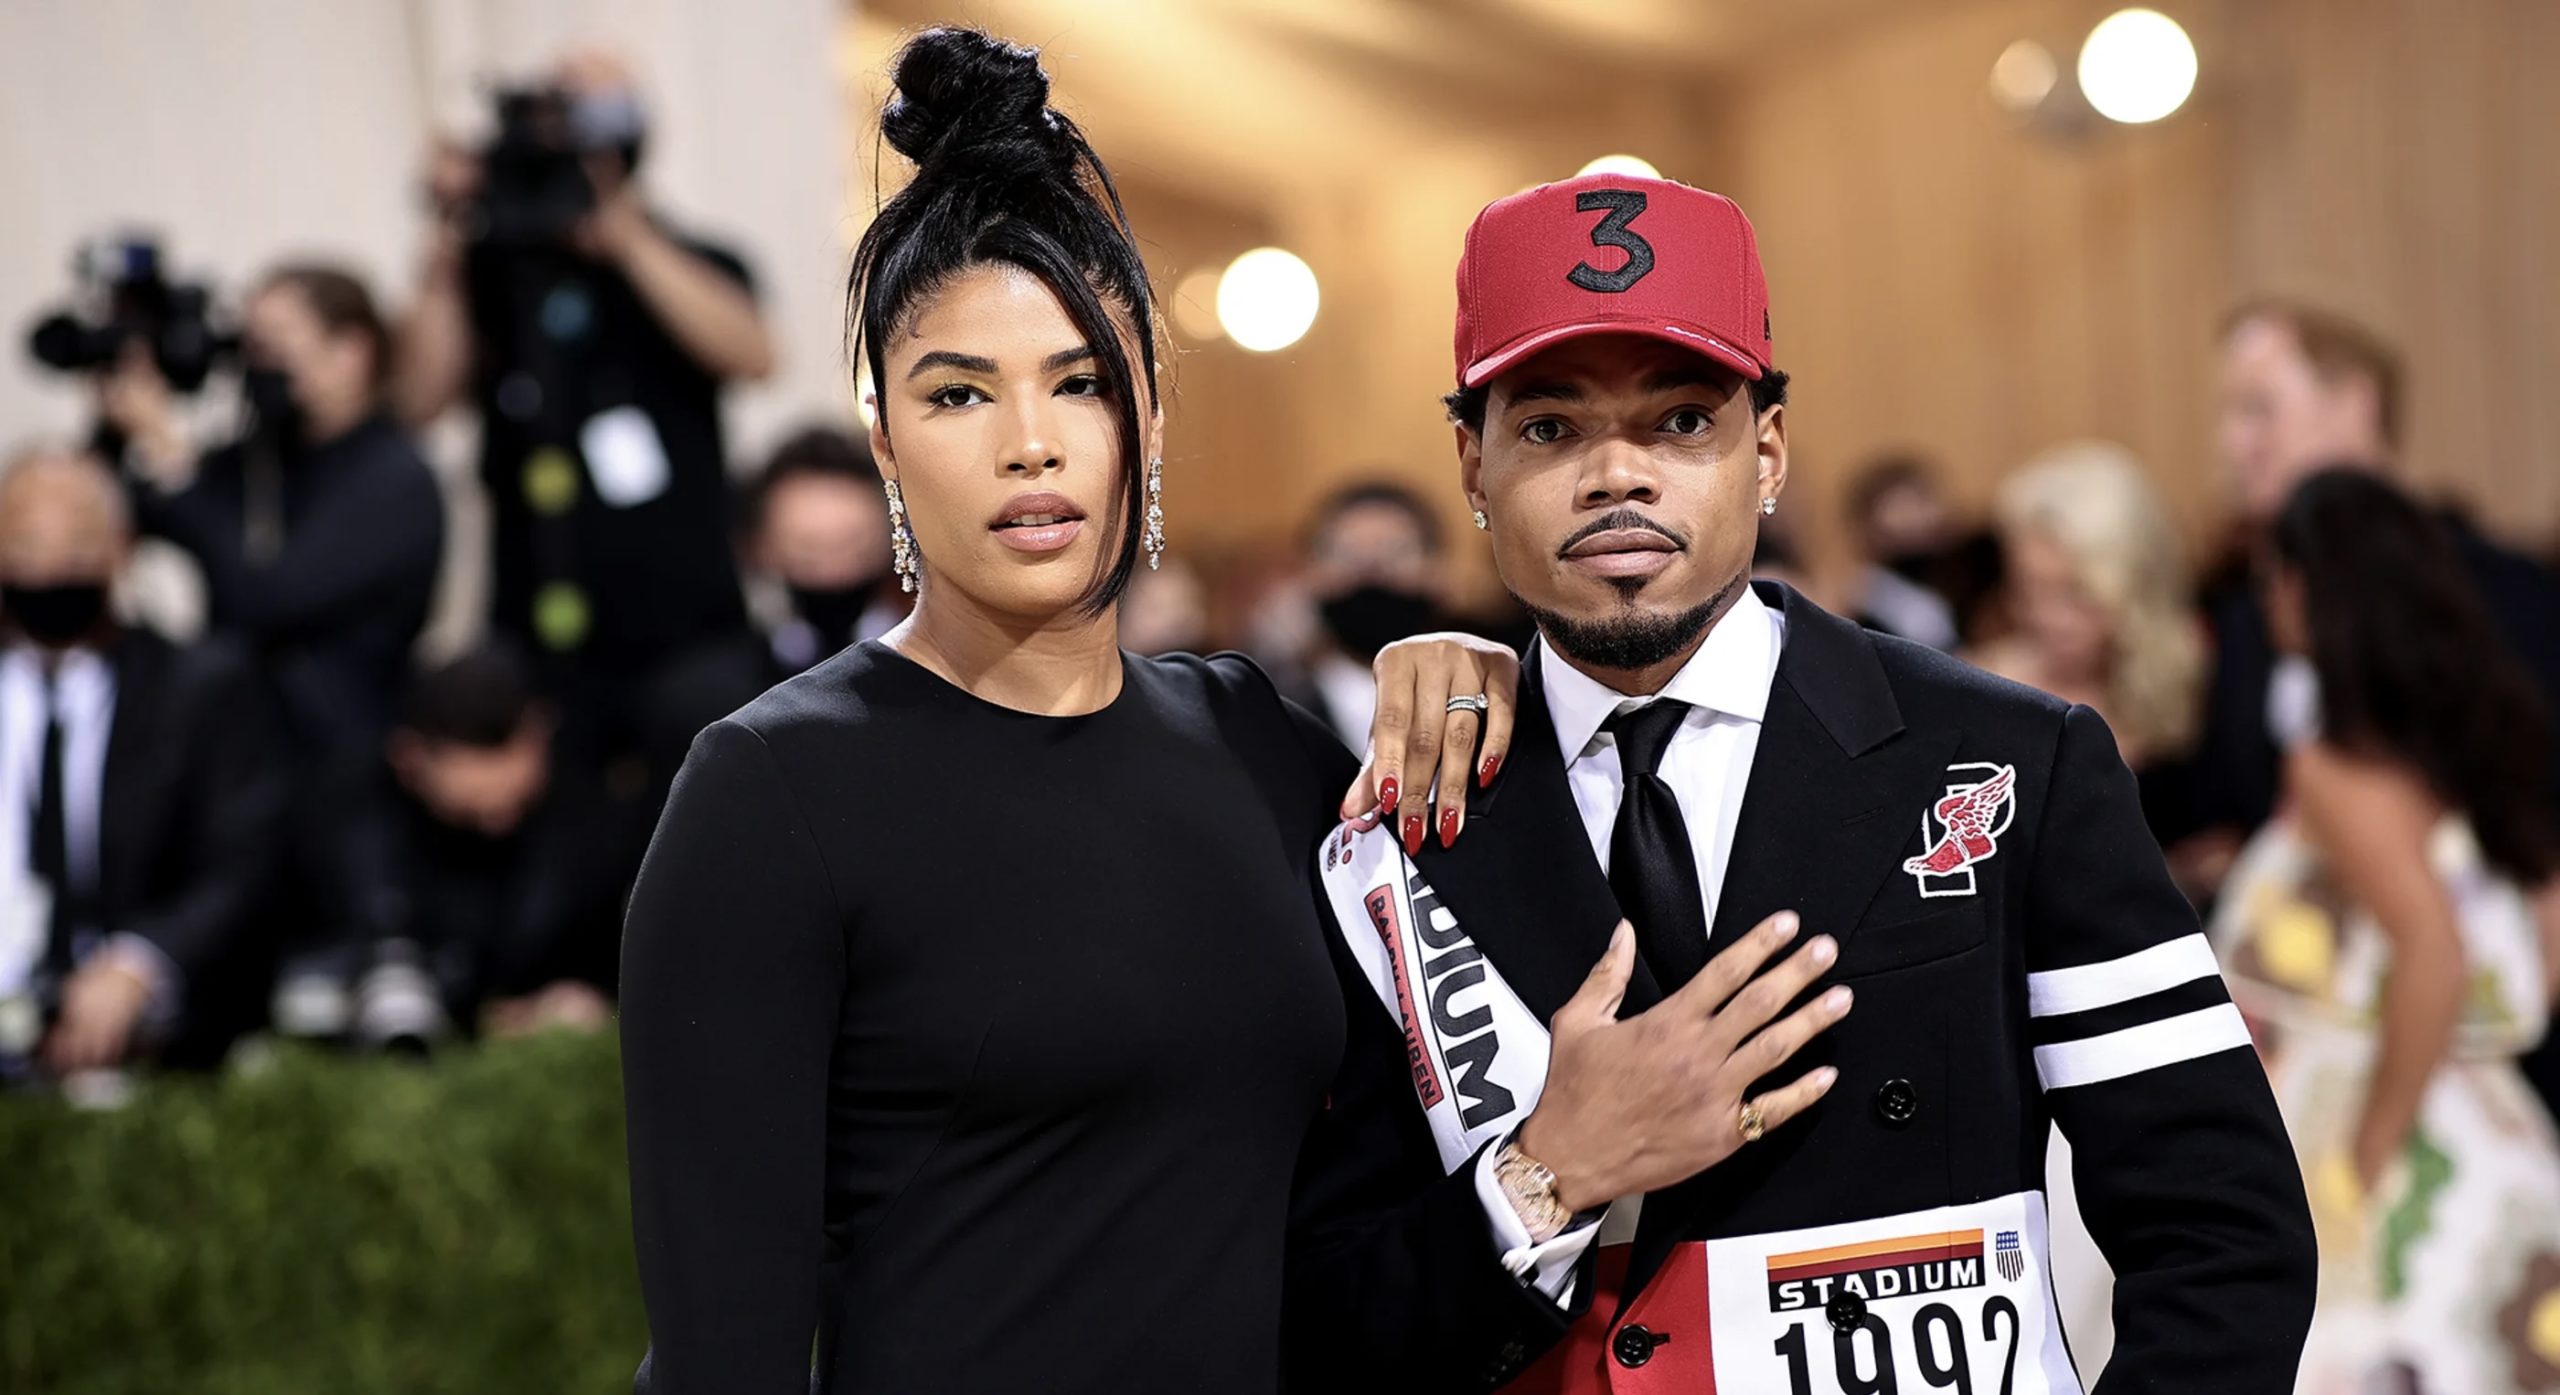 Chance the Rapper Seemingly Responds to Wife’s Caption About Not Growing Up With Bill Burr Joke